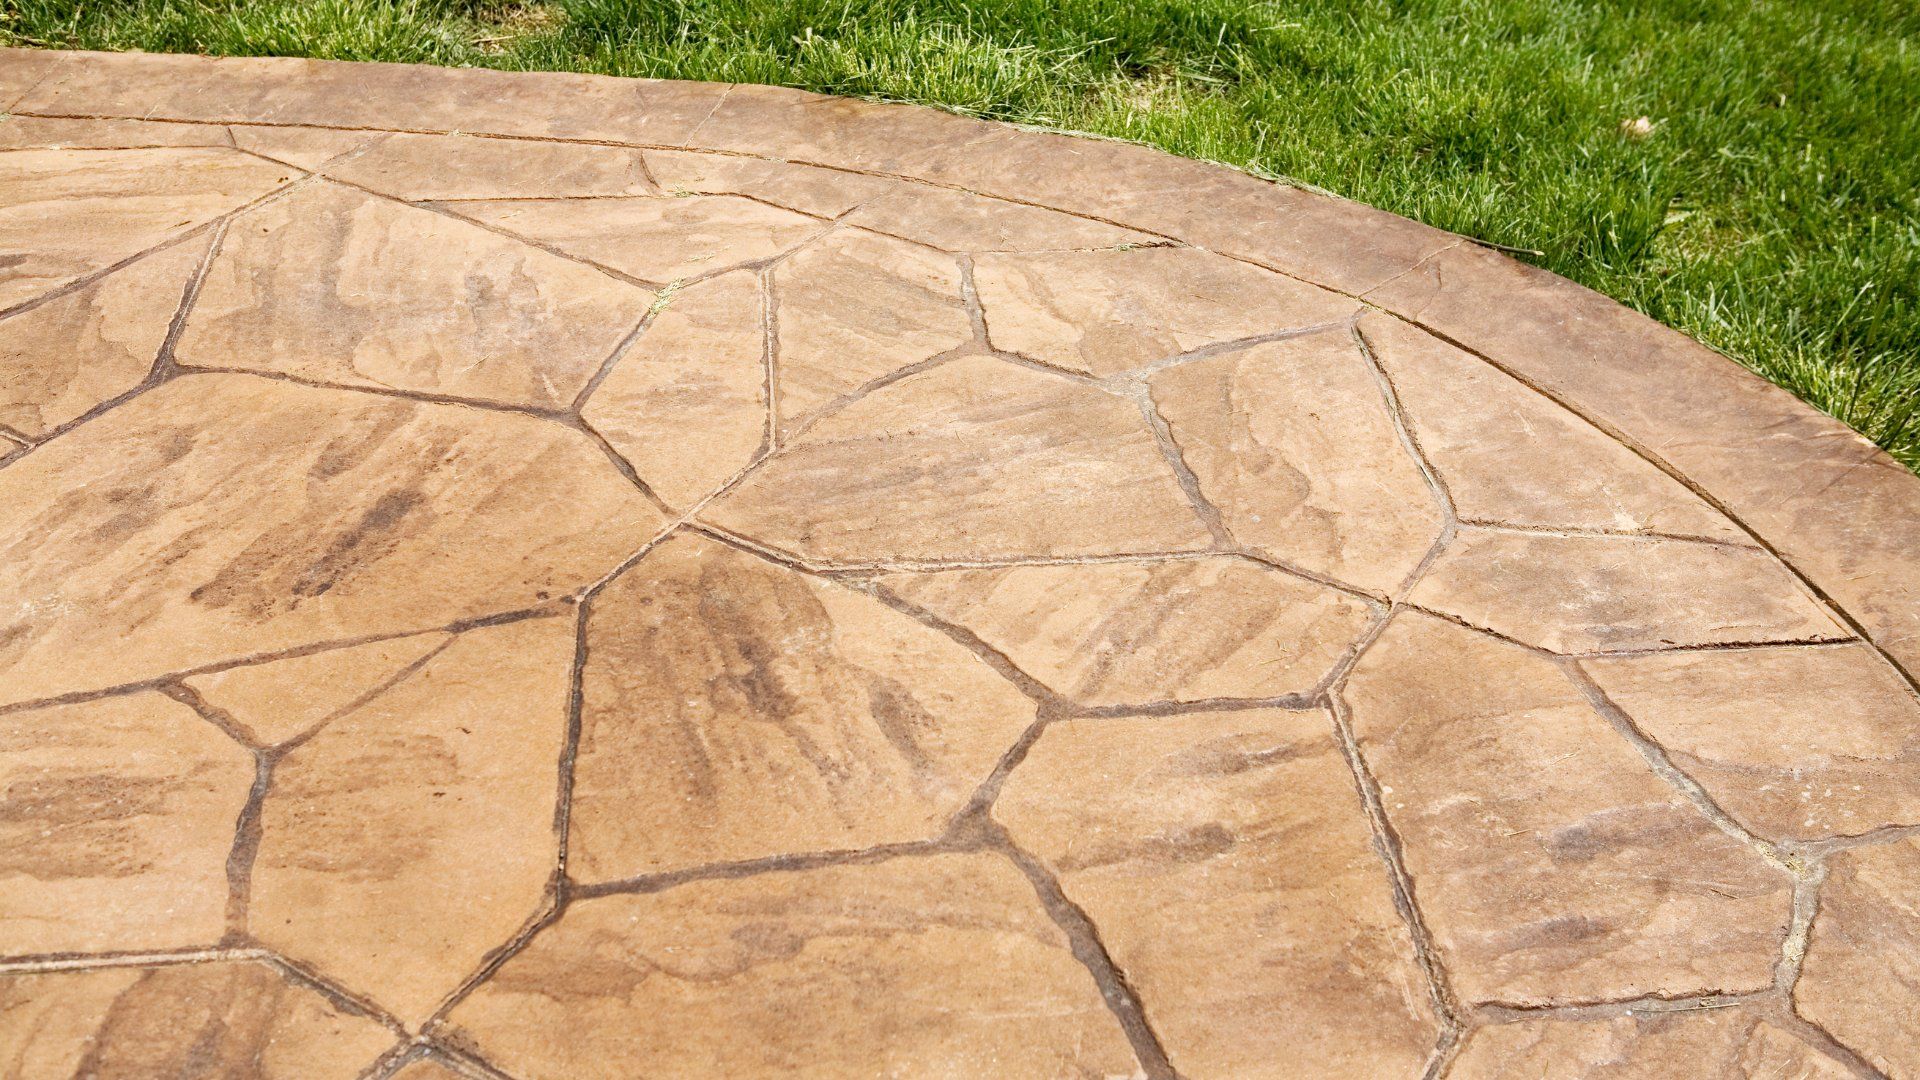 Close up picture of a stamped concrete patio with an interesting design on it.